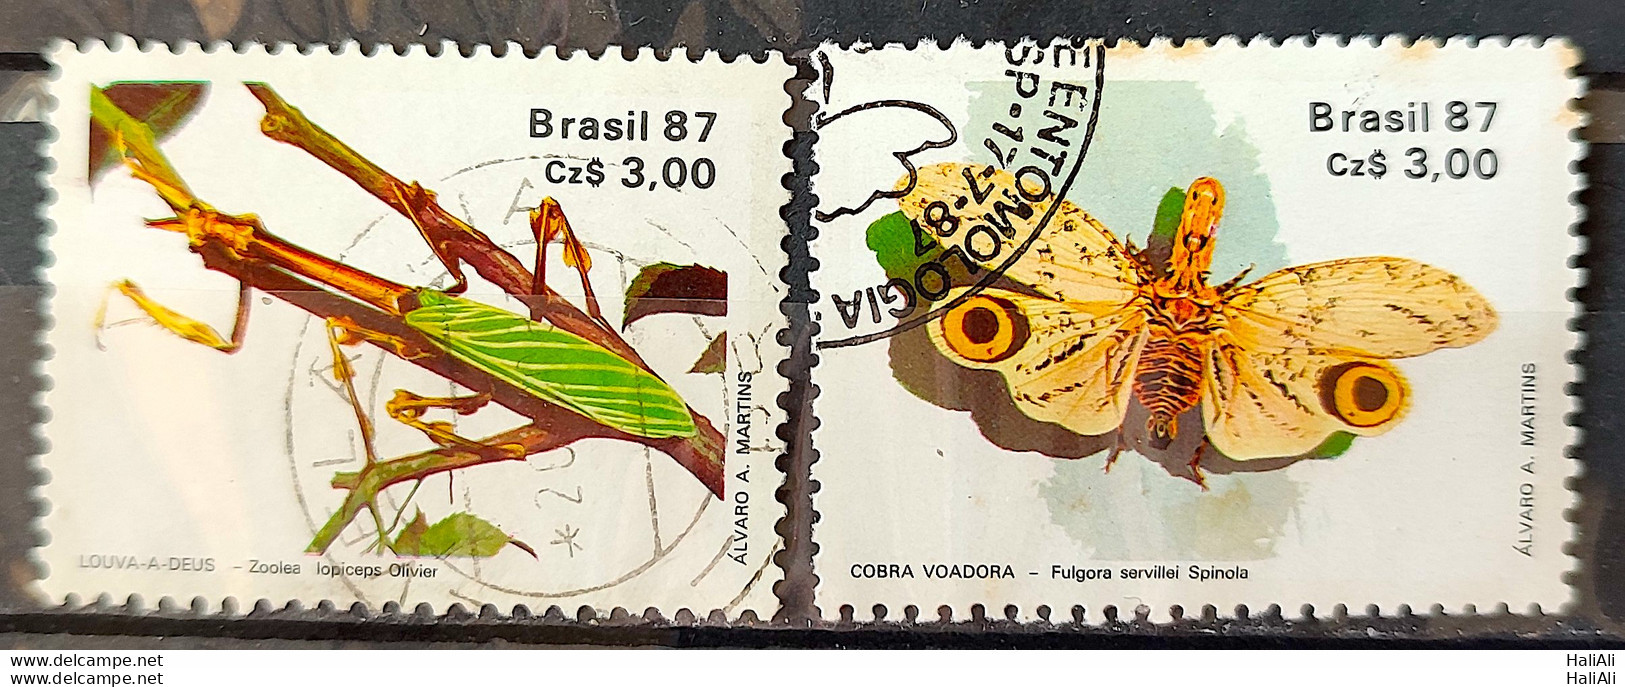 C 1554 Brazil Stamp 50 Years Brazilian Entomology Society Praise God Butterfly 1987 Complete Series Circulated 1 - Used Stamps